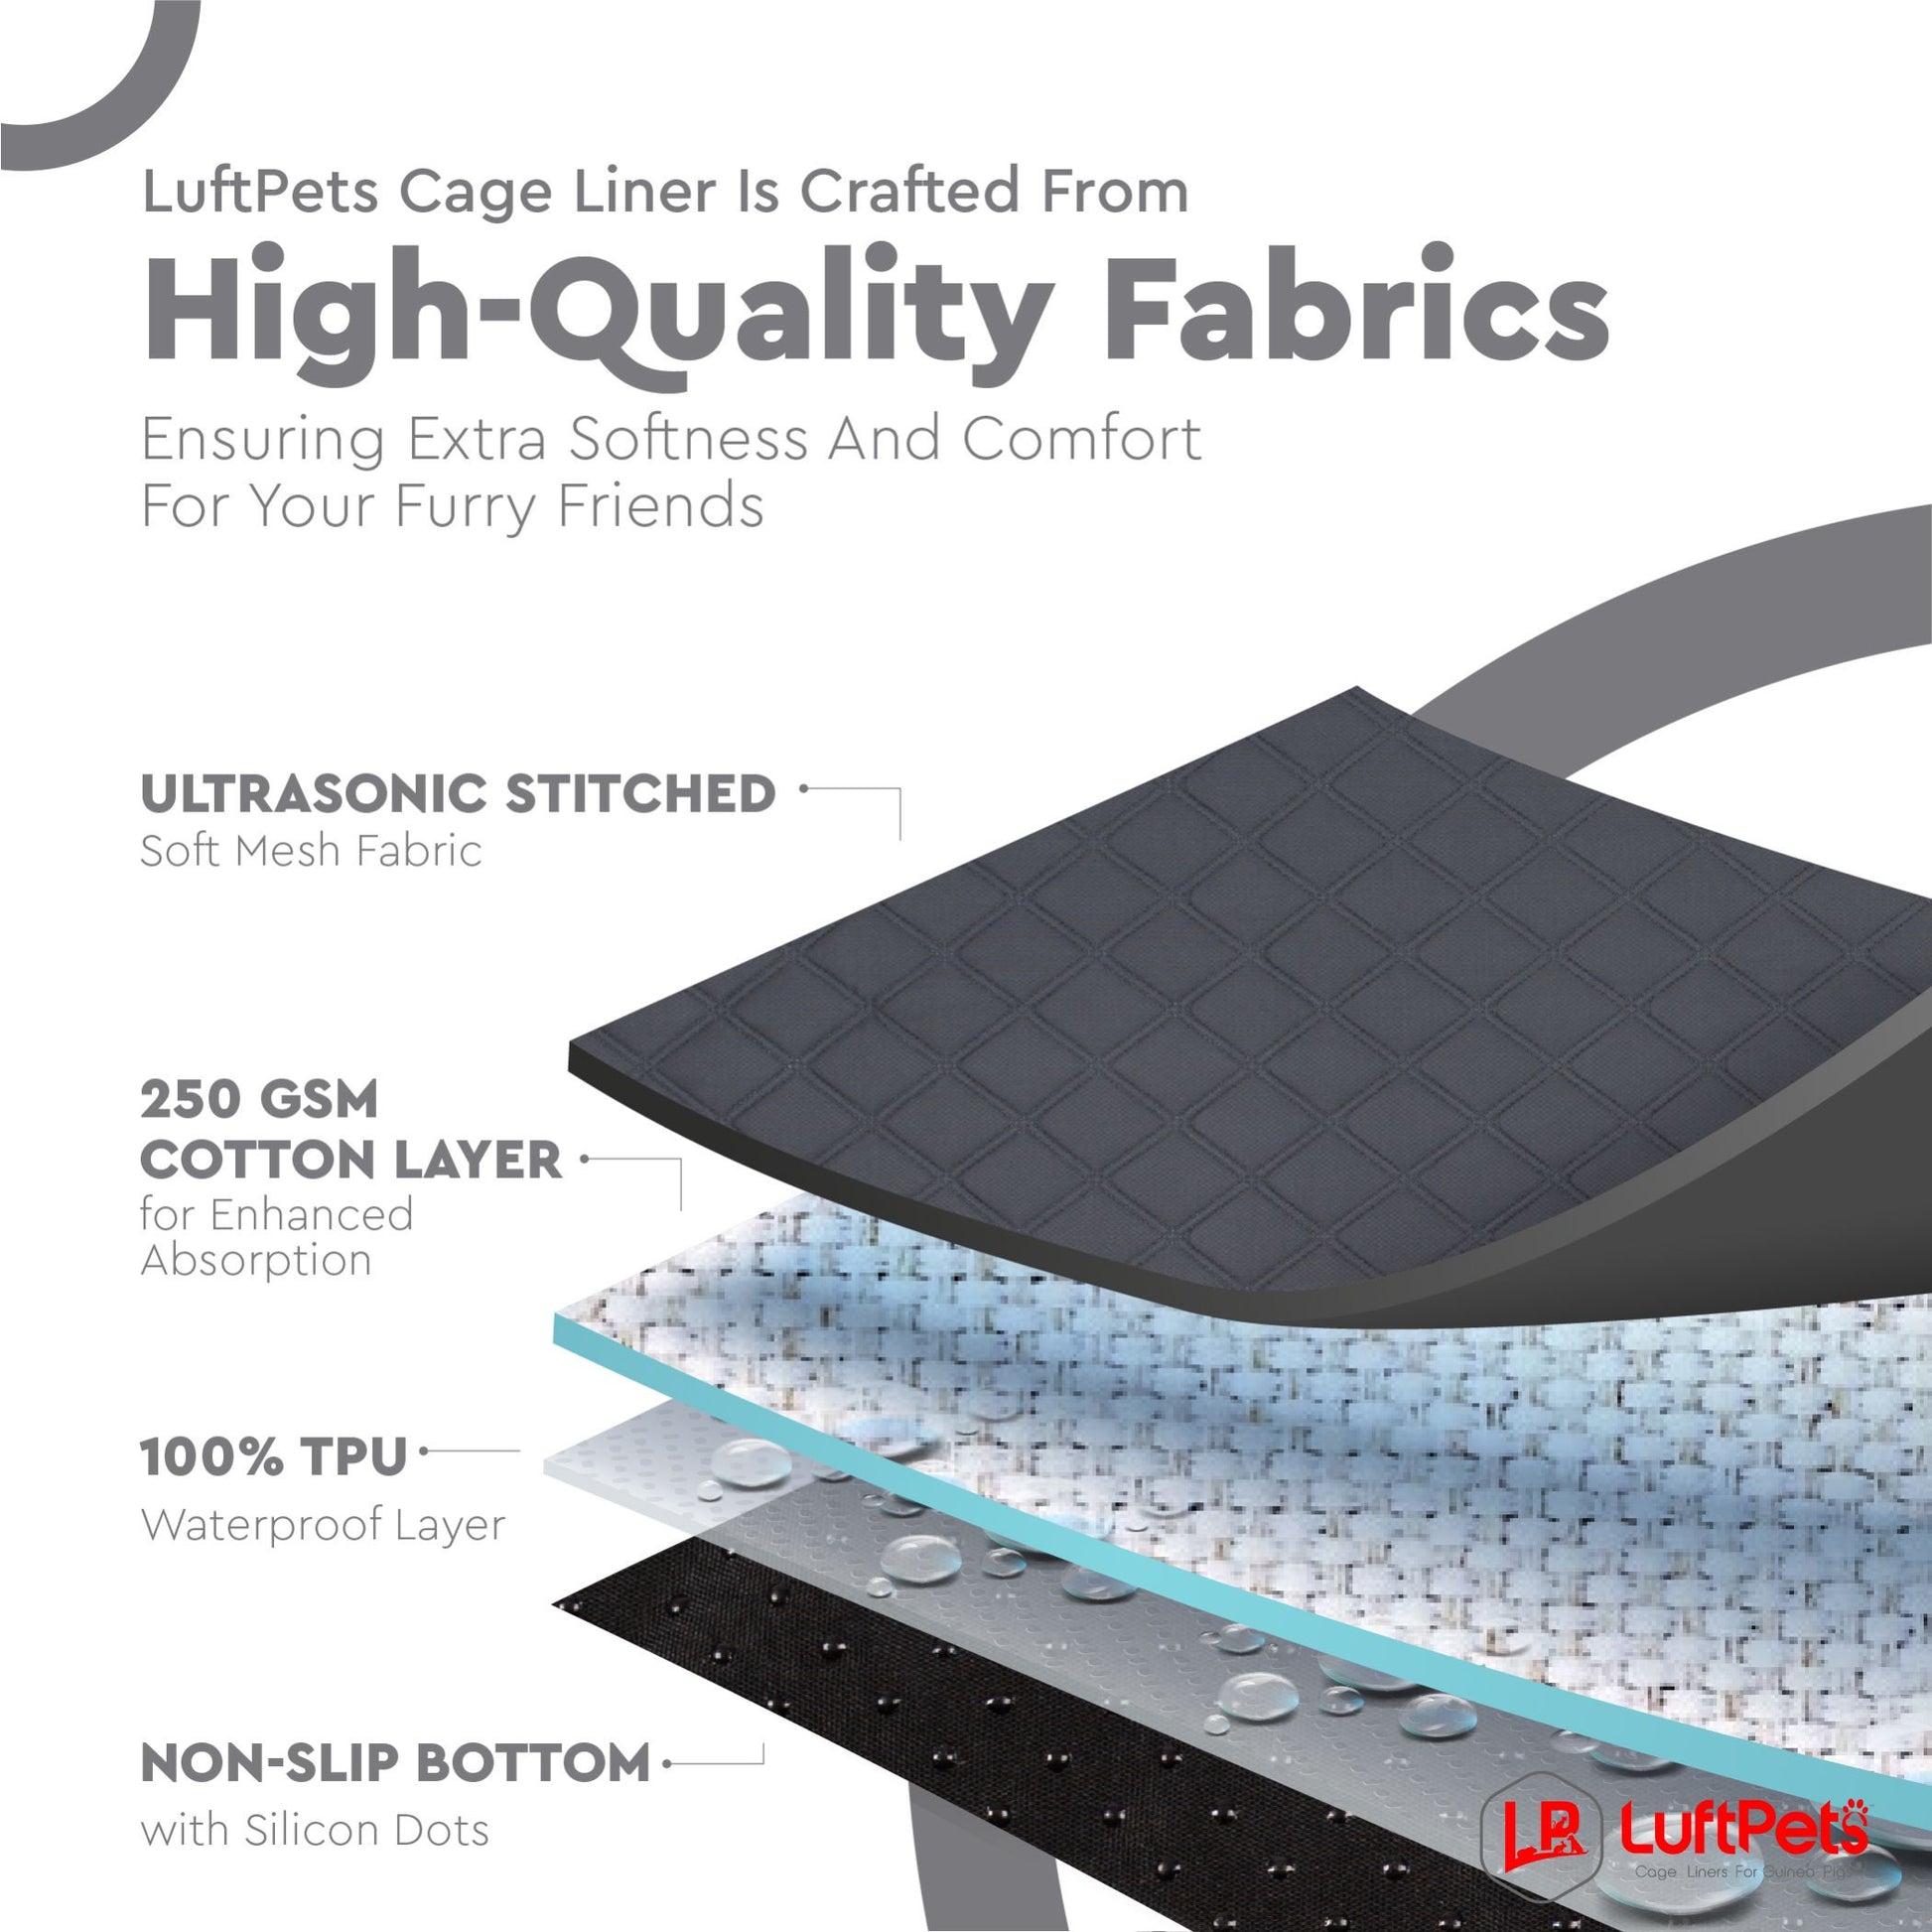 LuftPets cage liner with high-quality fabrics